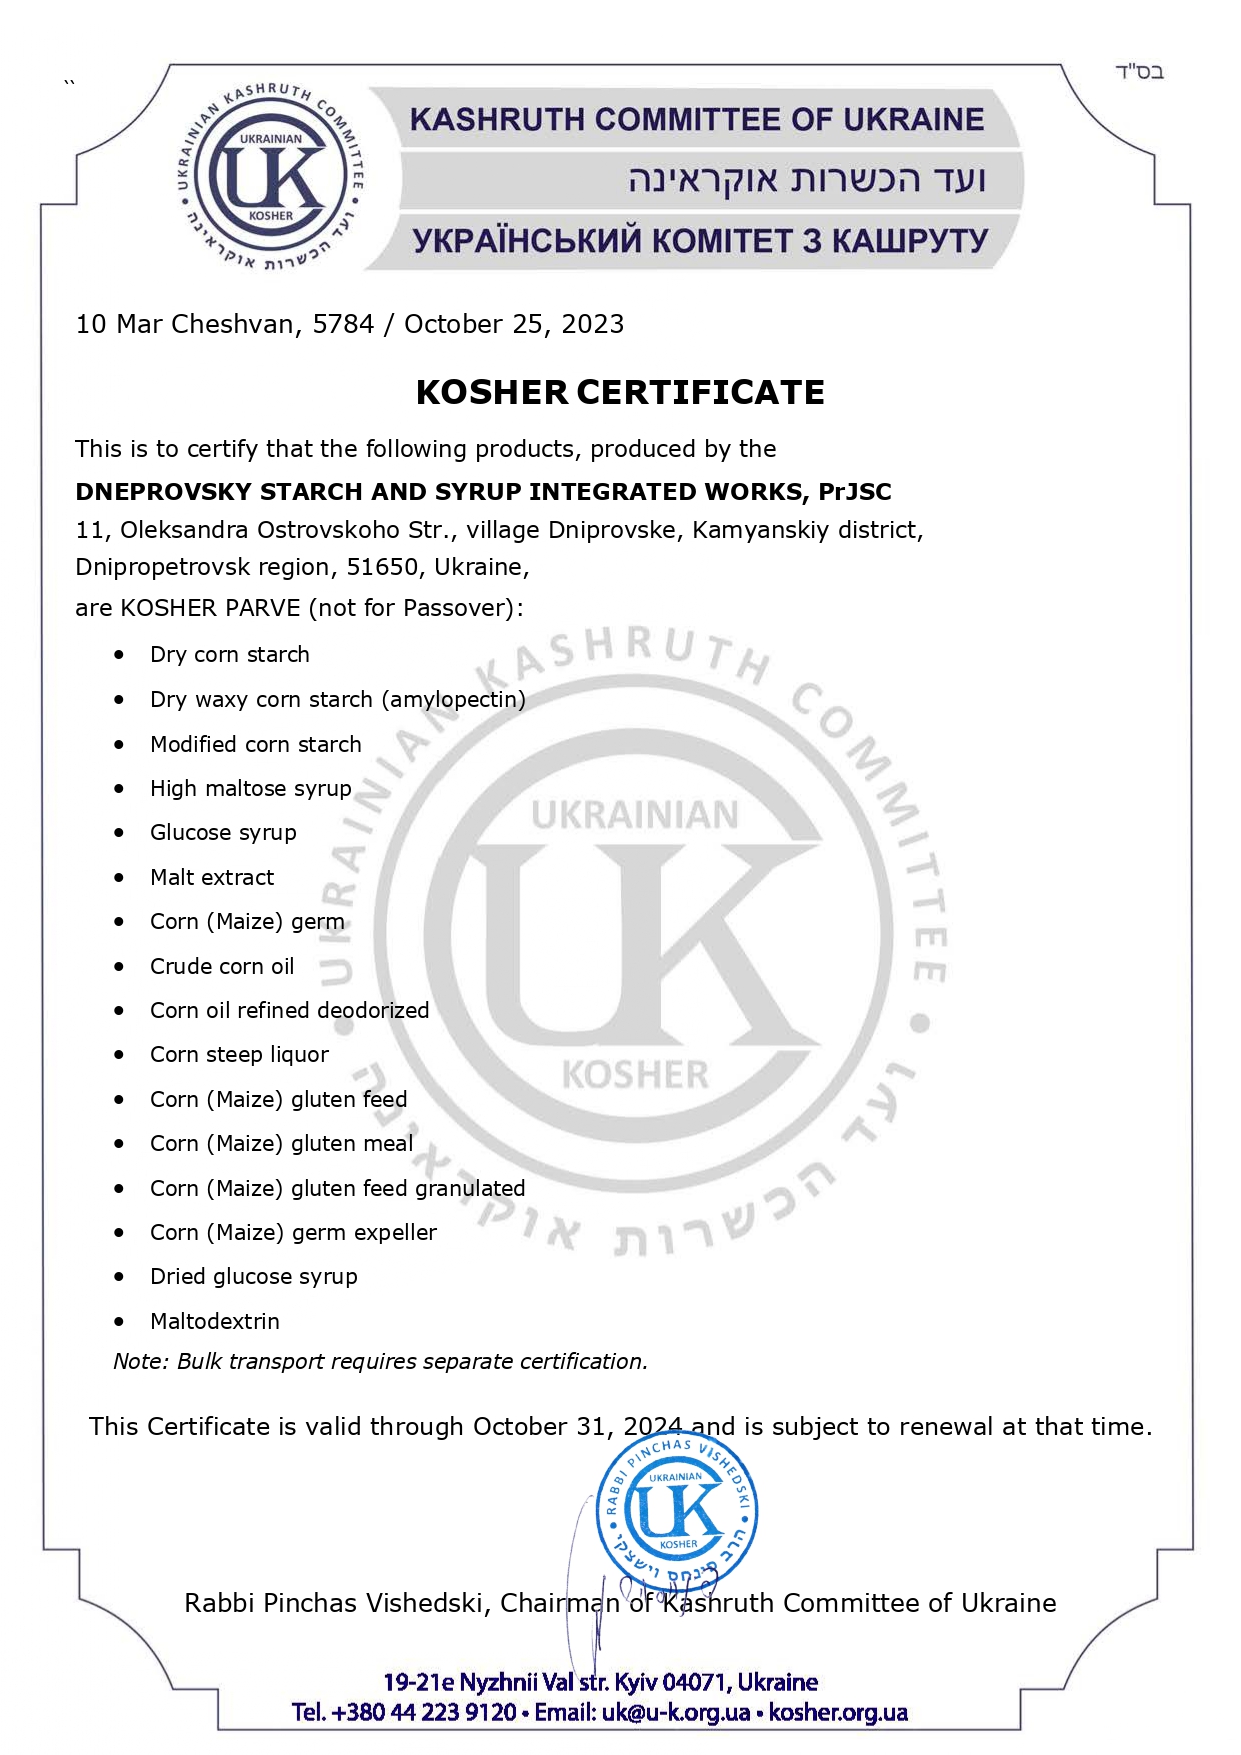 Kosher Certificate Dneprovsky Starch and Syrup Integrated Works, PrLSC